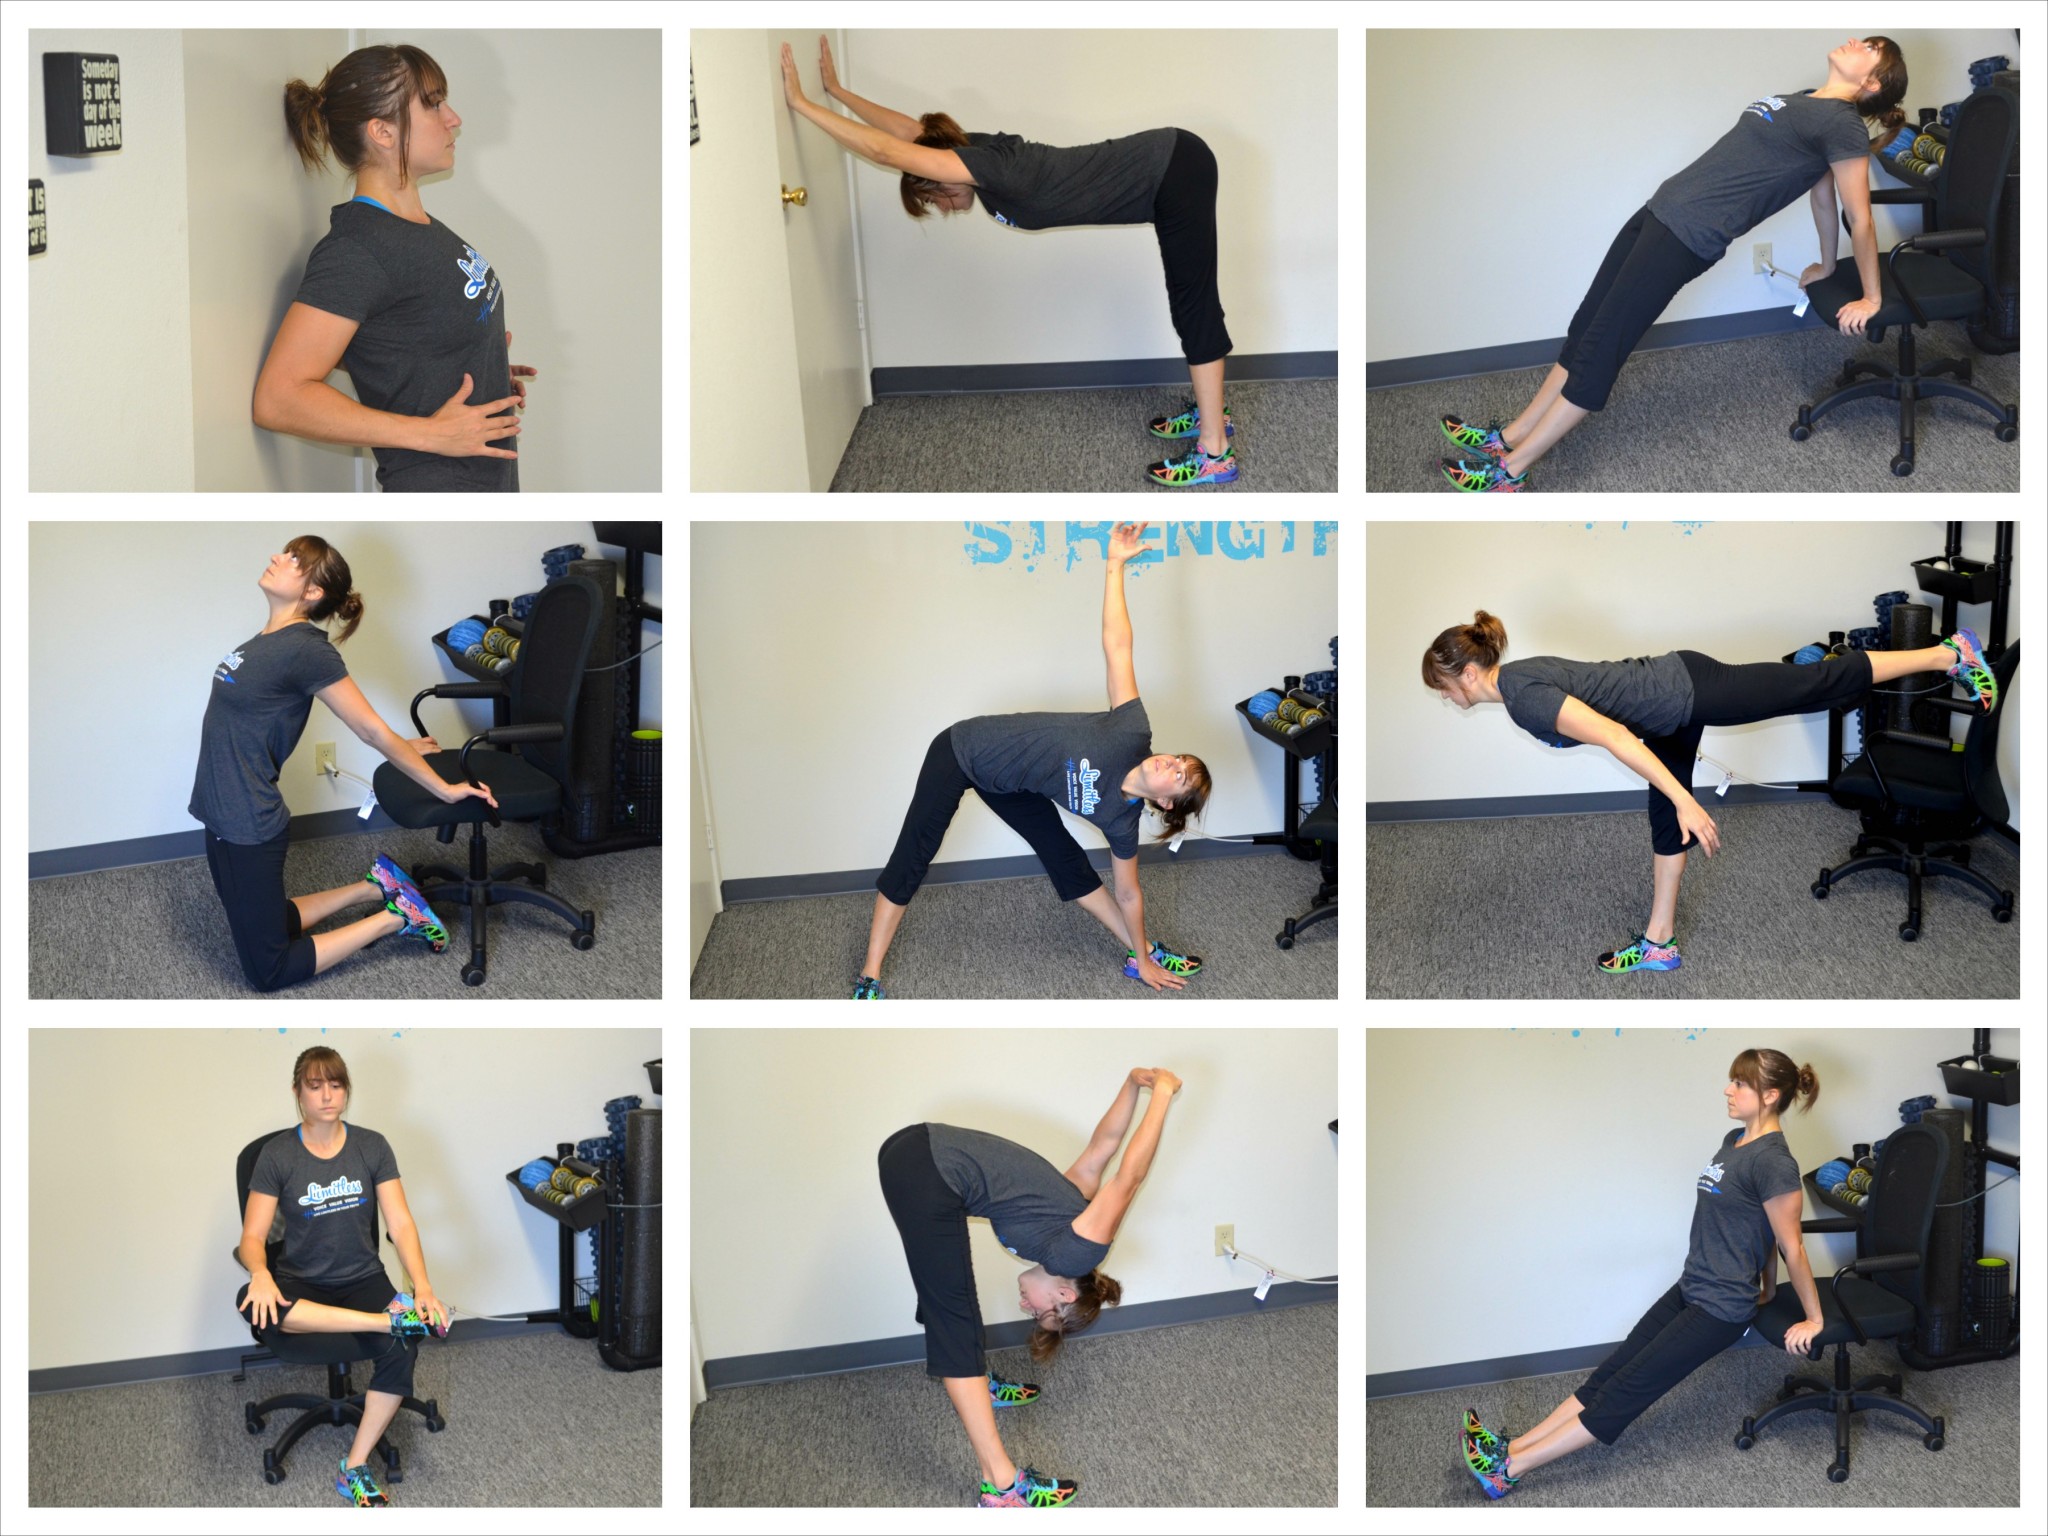 Pre Workout Whole30 Zucchini How To Do A Scissor Kick High Jump Exercises To Do At Your Desk